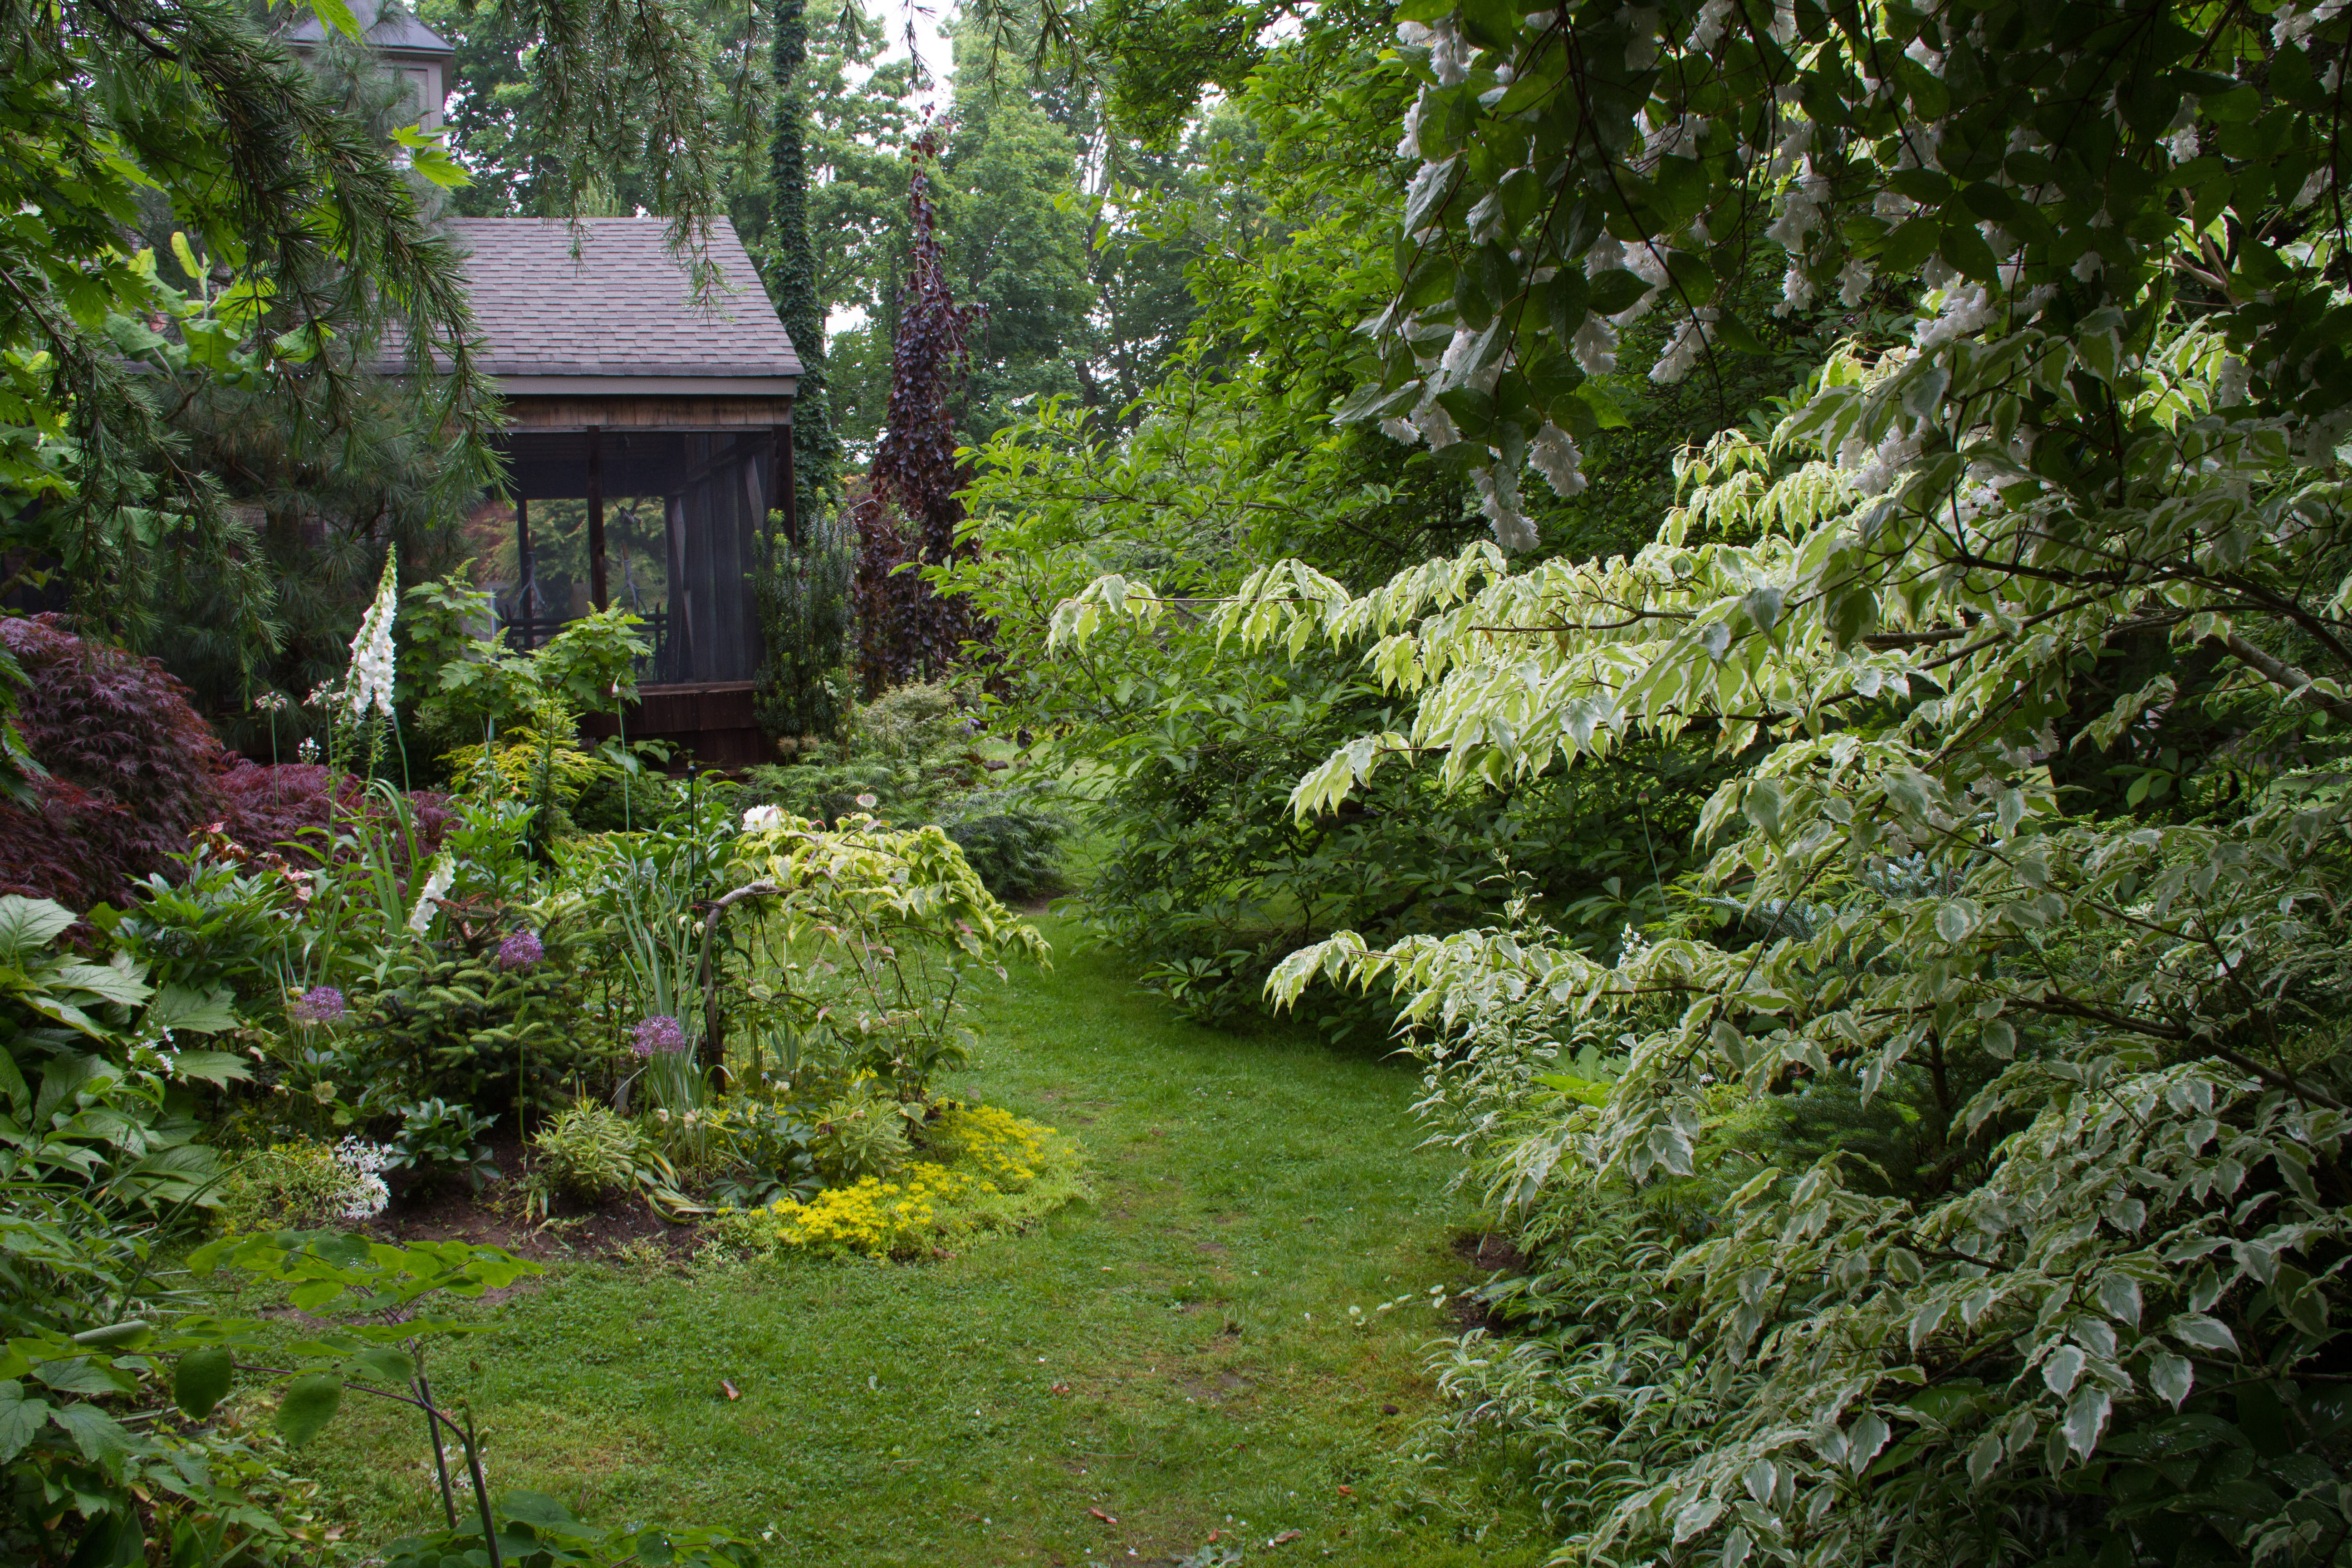 Other houses surround this densely planted Long Island garden. 